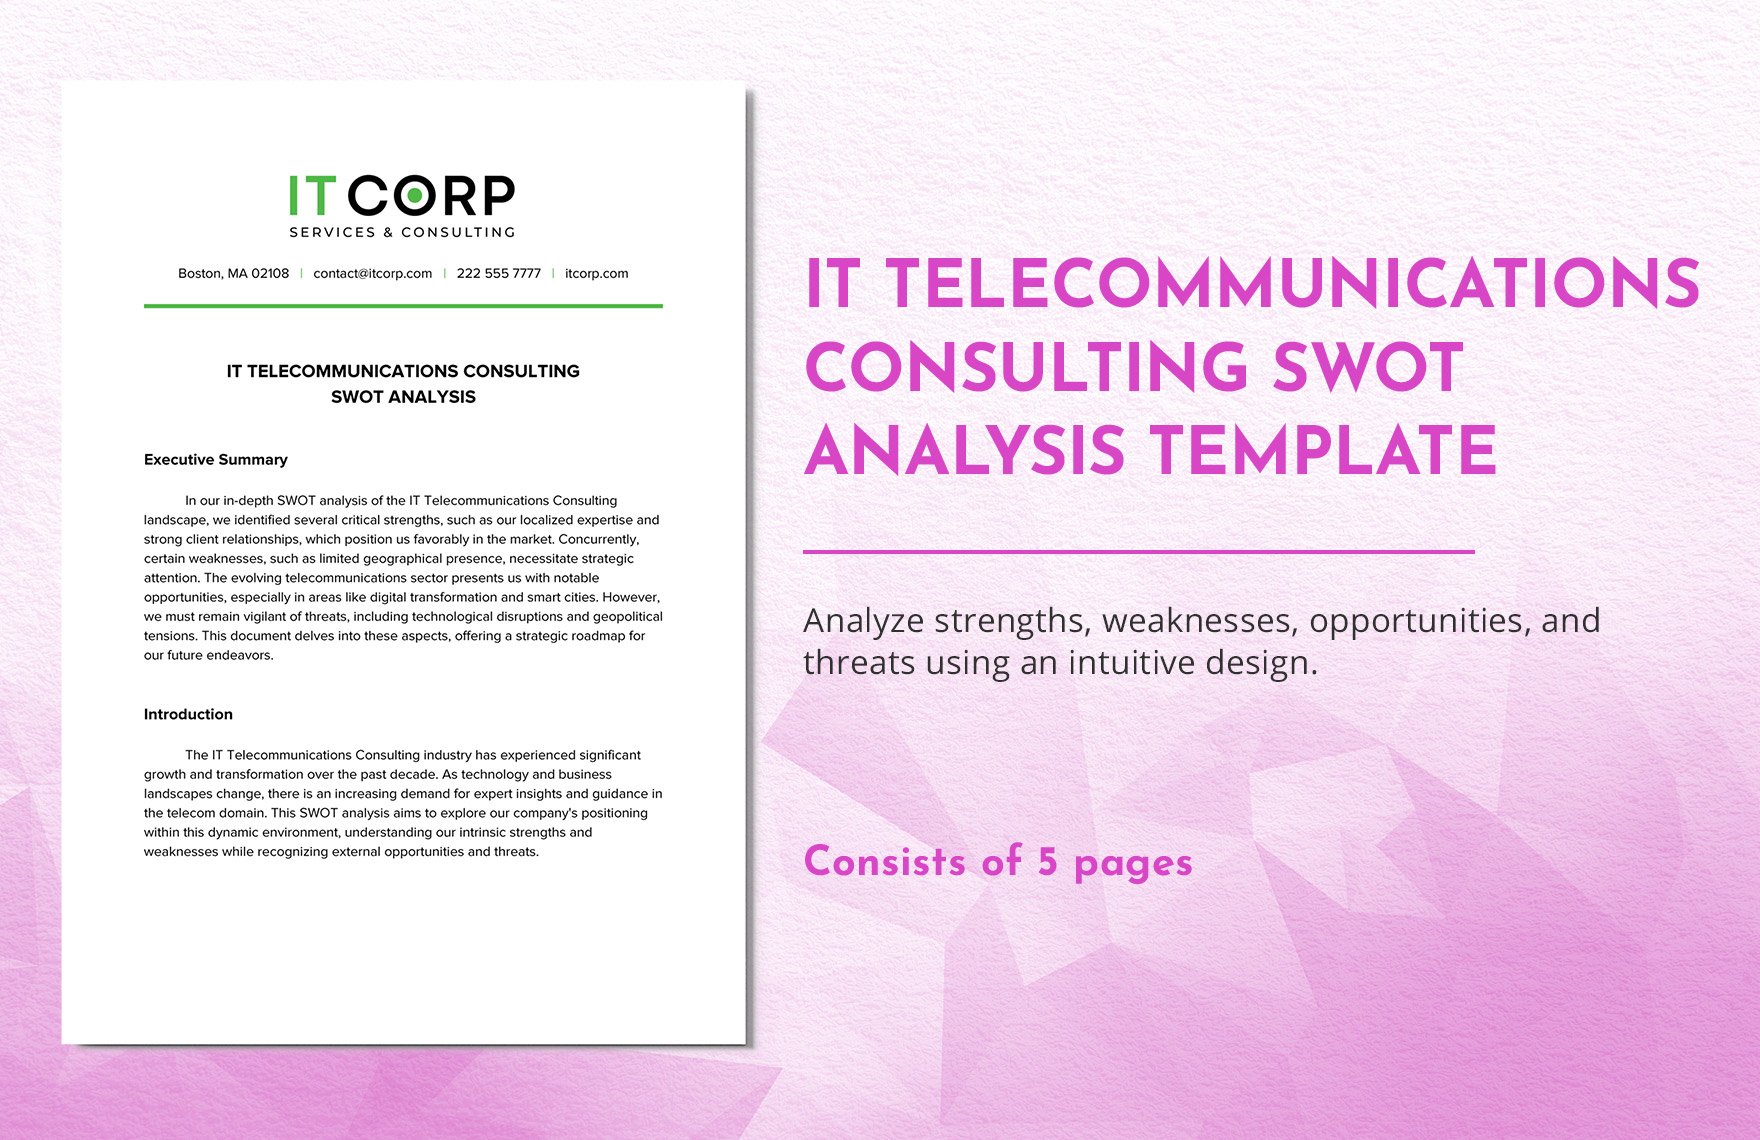 IT Telecommunications Consulting SWOT Analysis Template